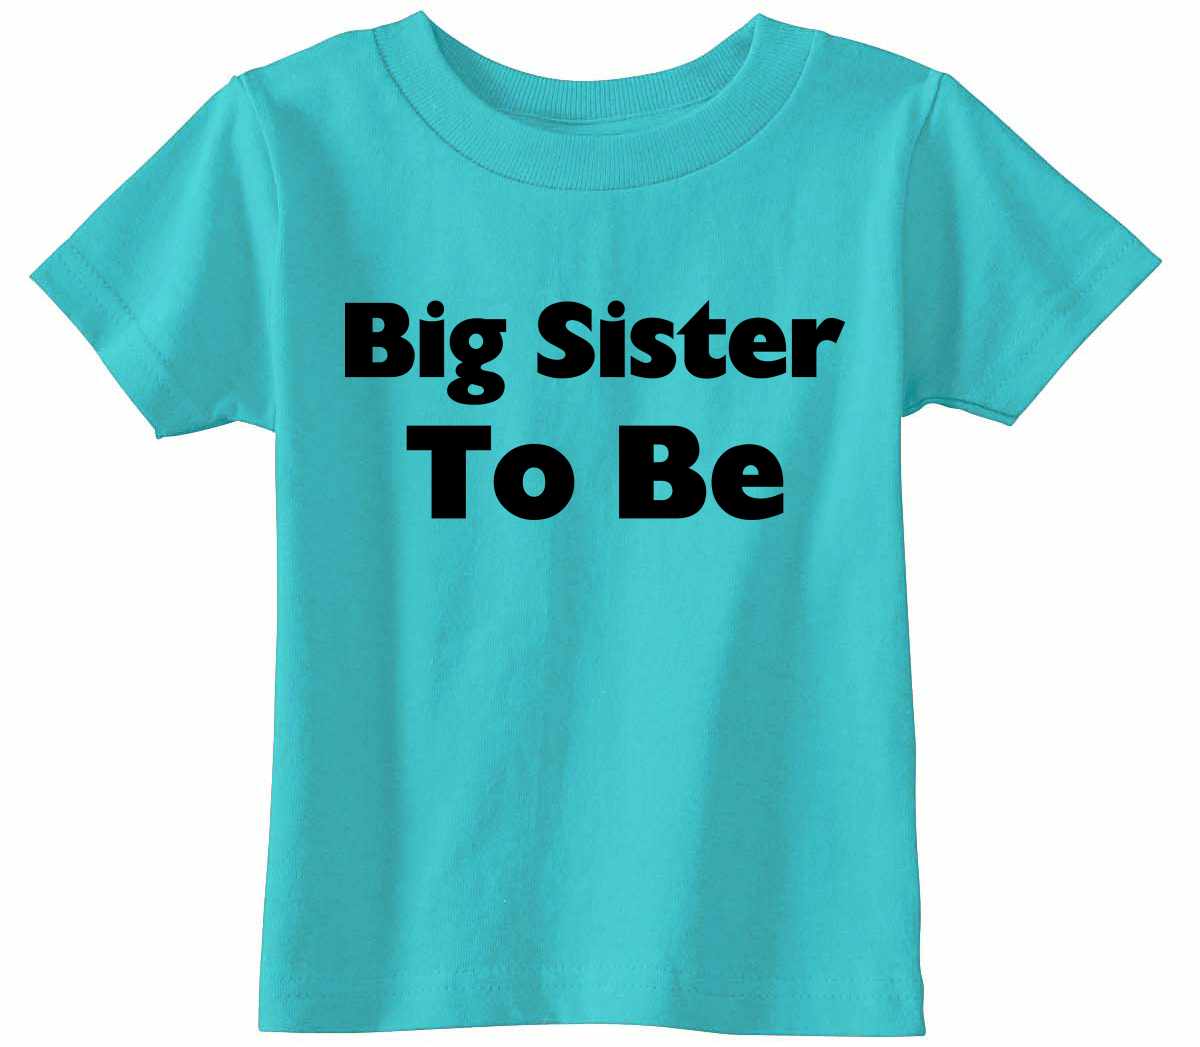 Big Sister To Be Infant/Toddler  (#876-7)